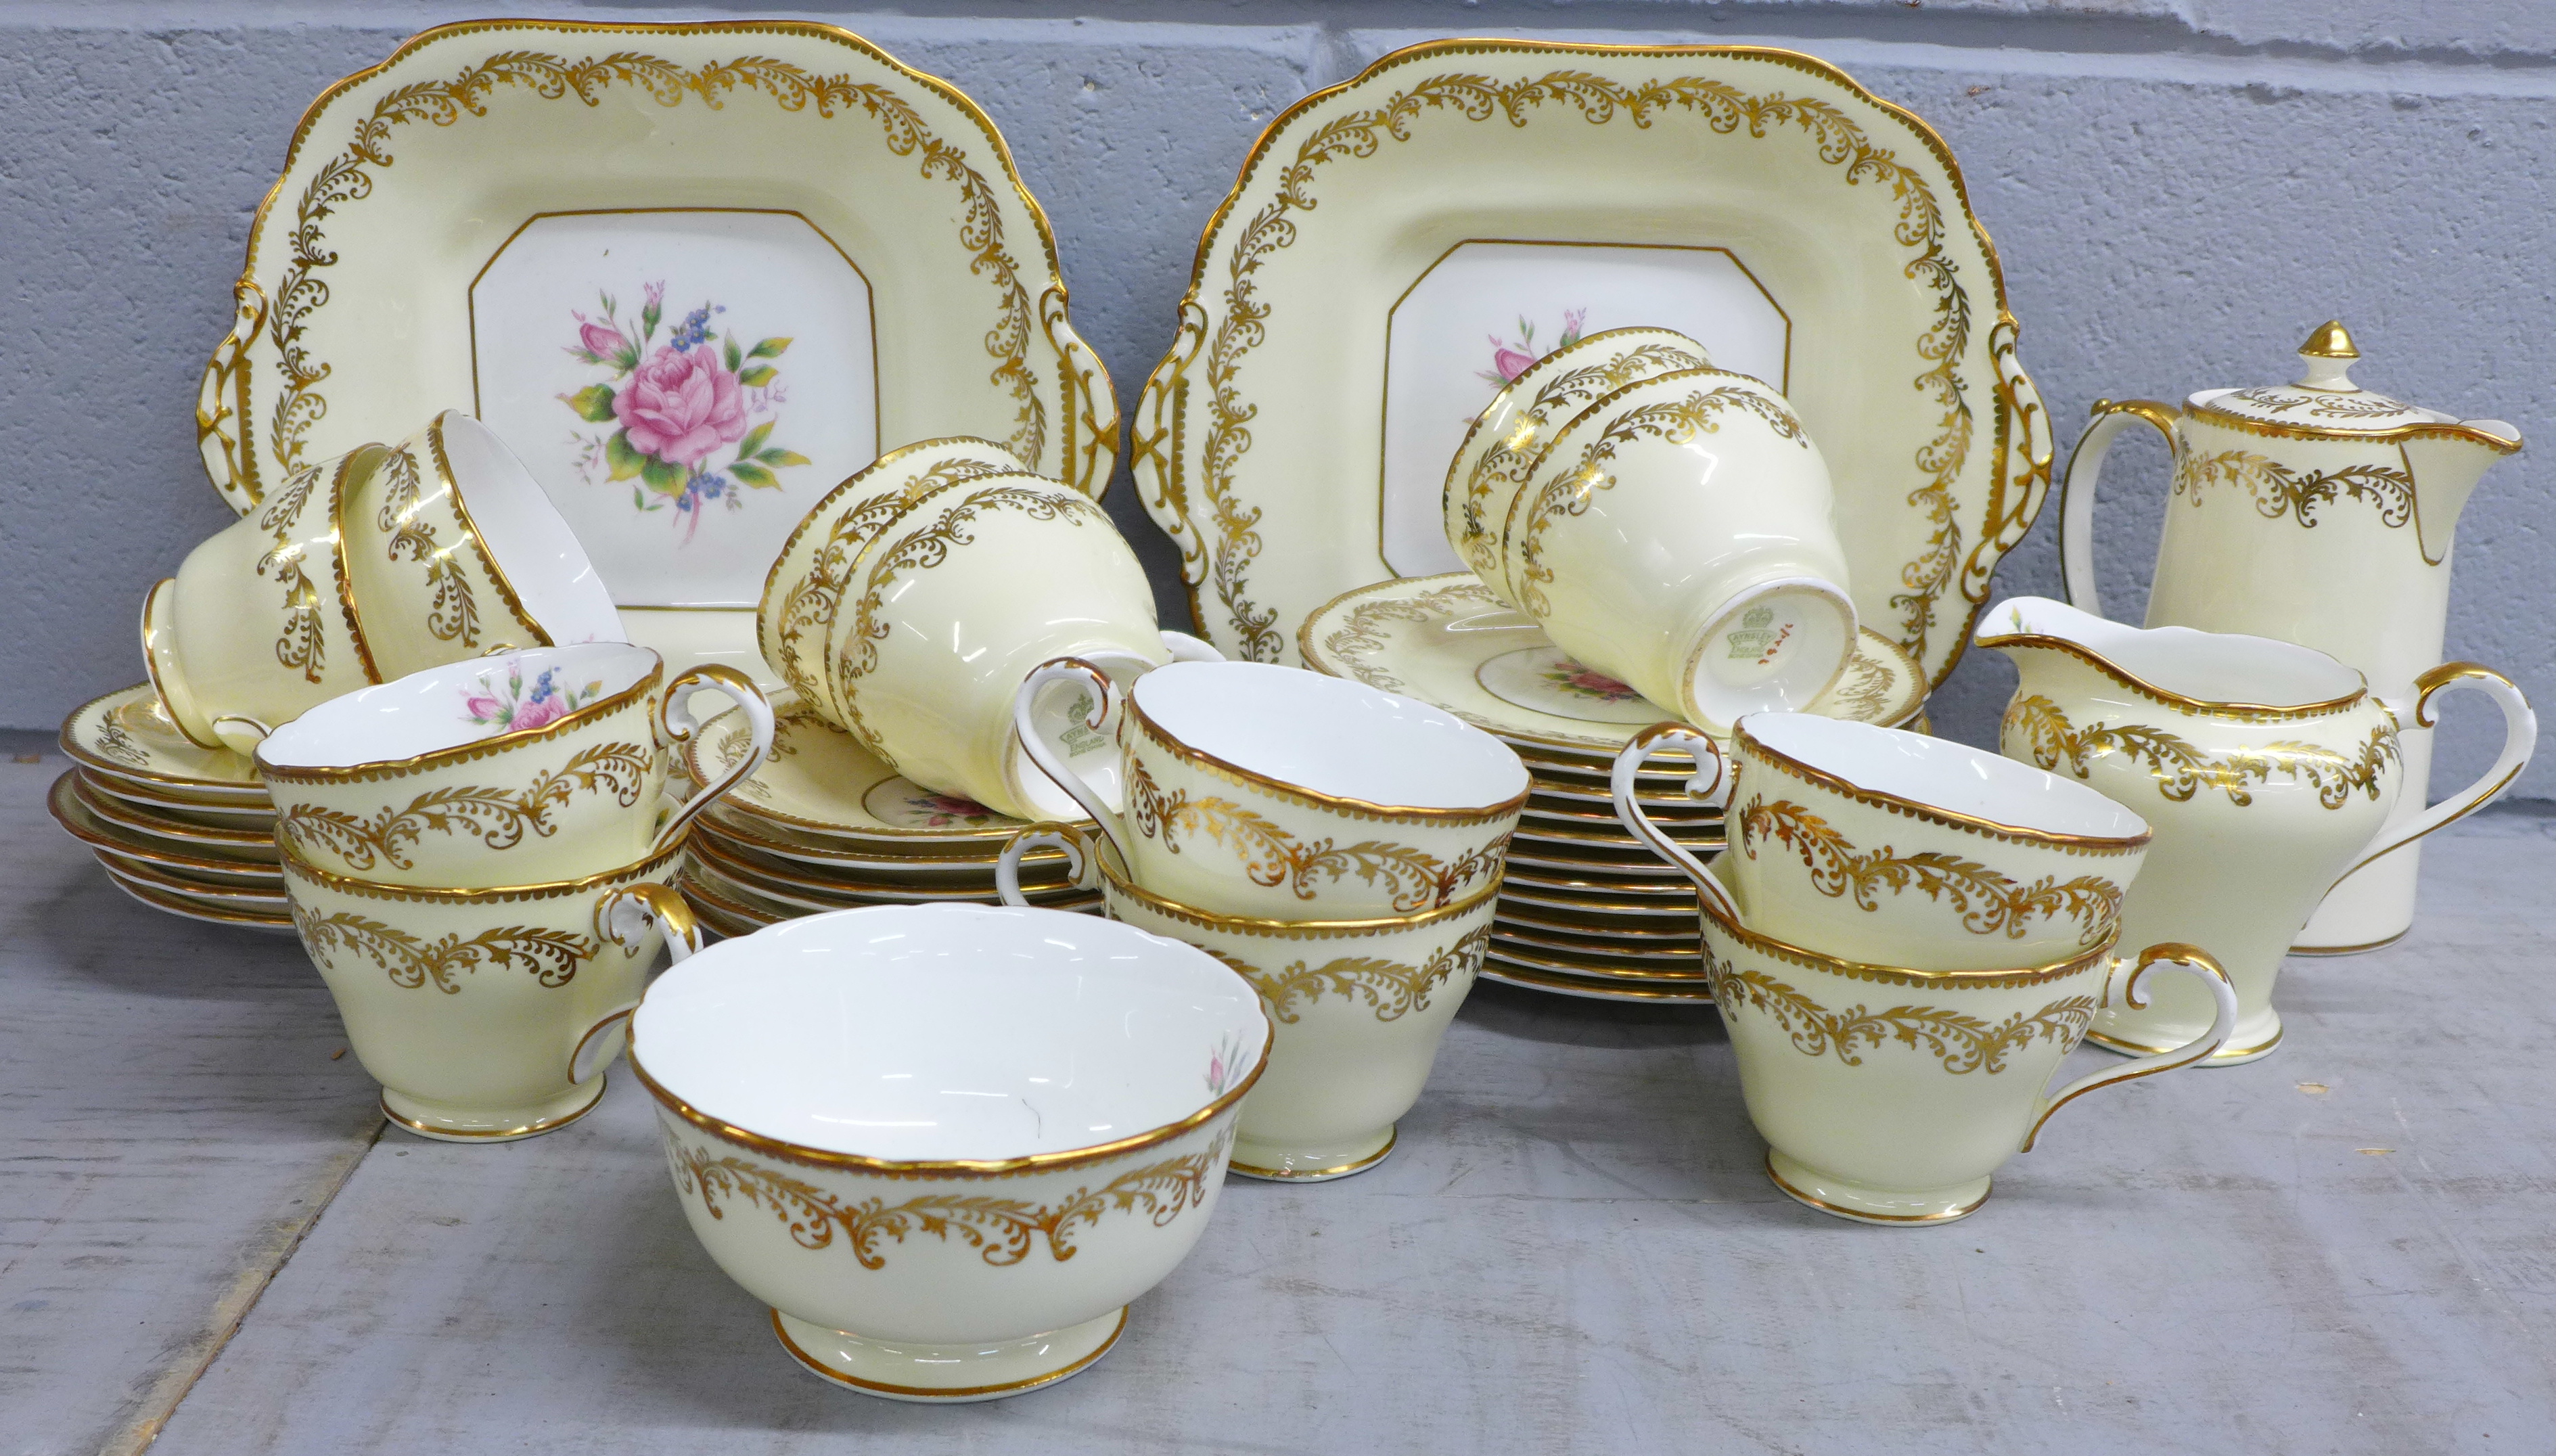 An Aynsley floral cream and gilt twelve setting tea set with hot water pot